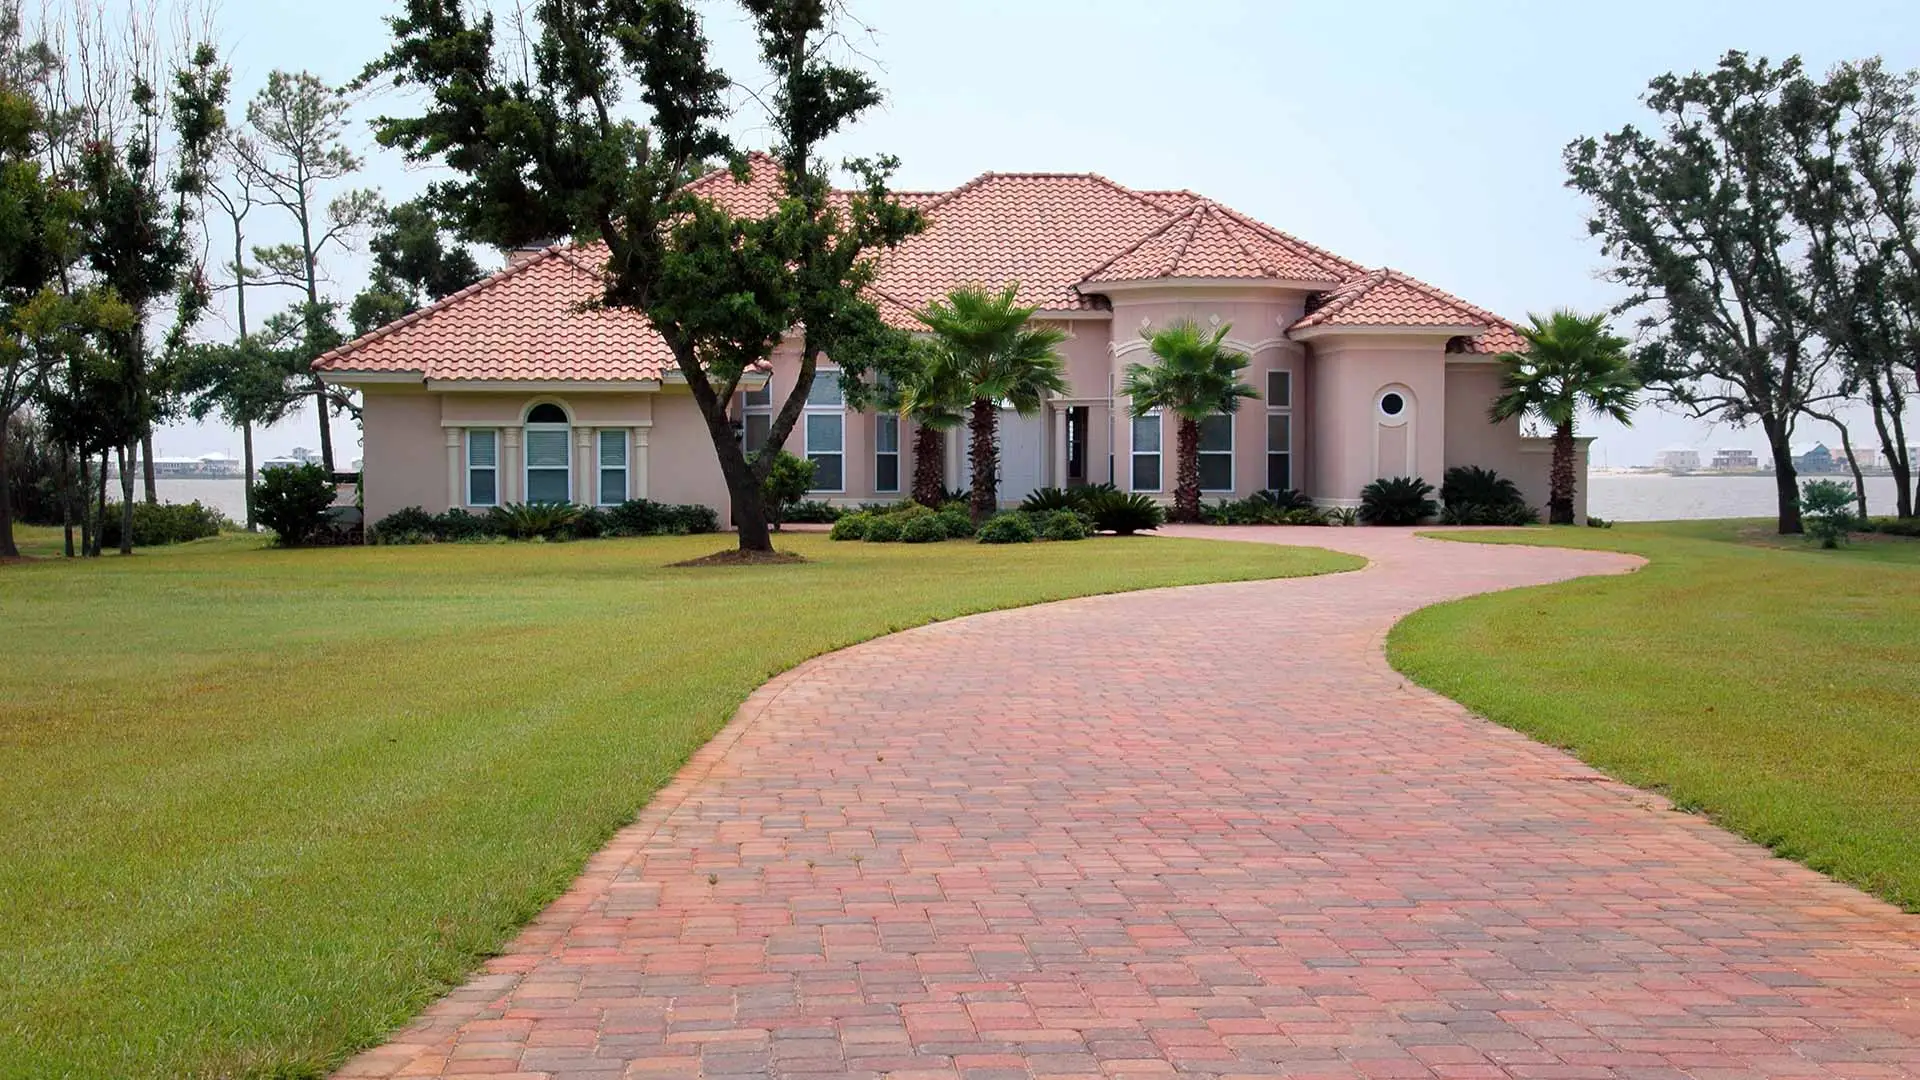 Beautiful decorative paver driveway leading up to a house in Orlando, FL.